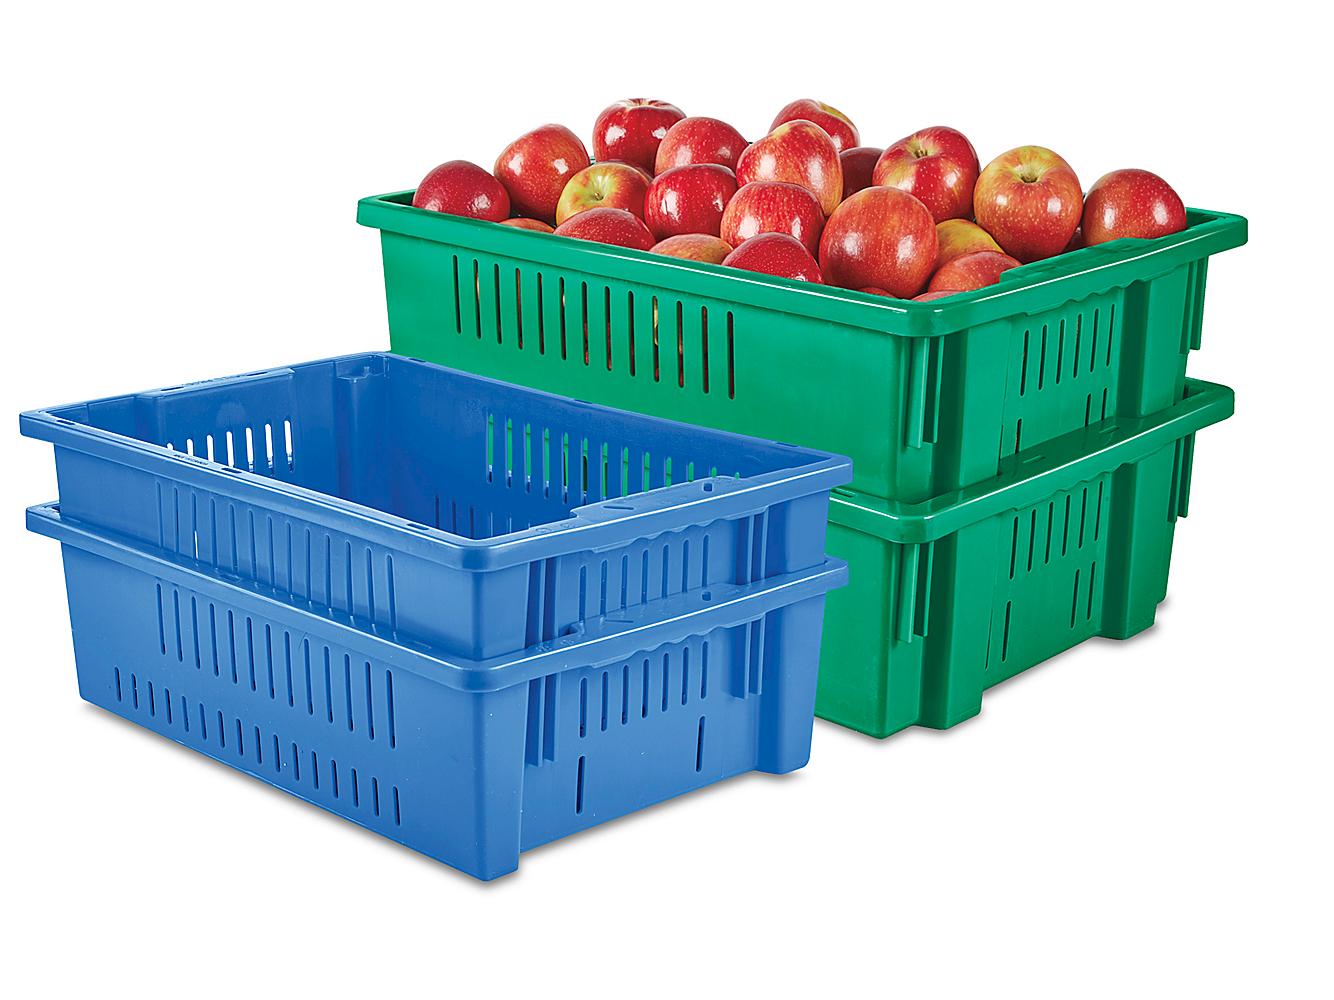 Nesting Boxes For Laying Hens Uline S-12422 Stackable Bins Storage Totes Bins 